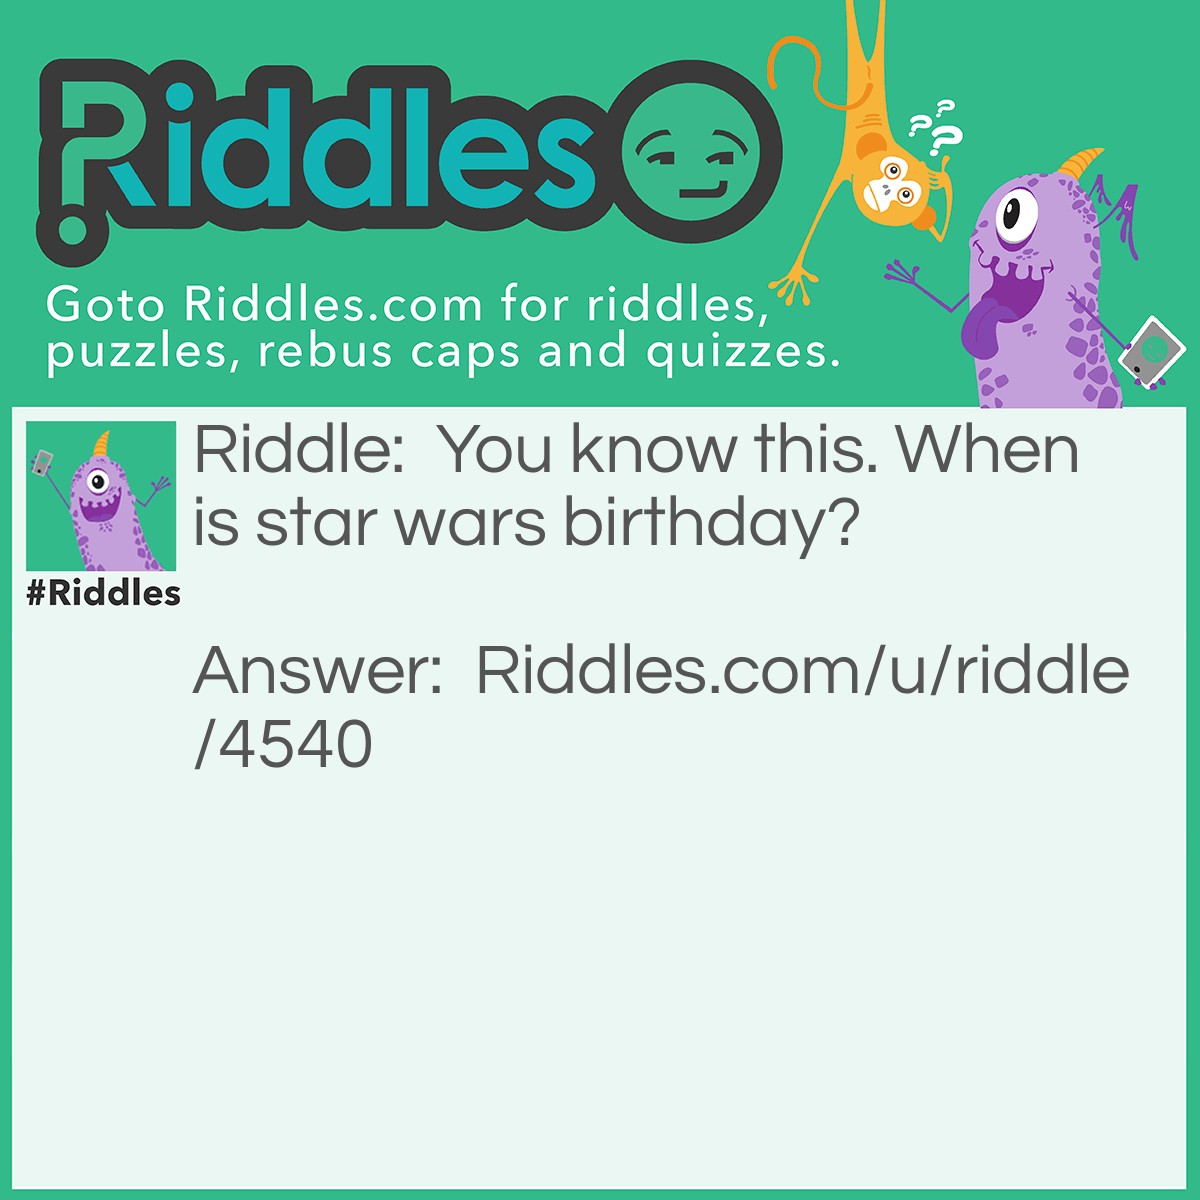 Riddle: You know this. When is star wars birthday? Answer: May the 4 But it is may 25.